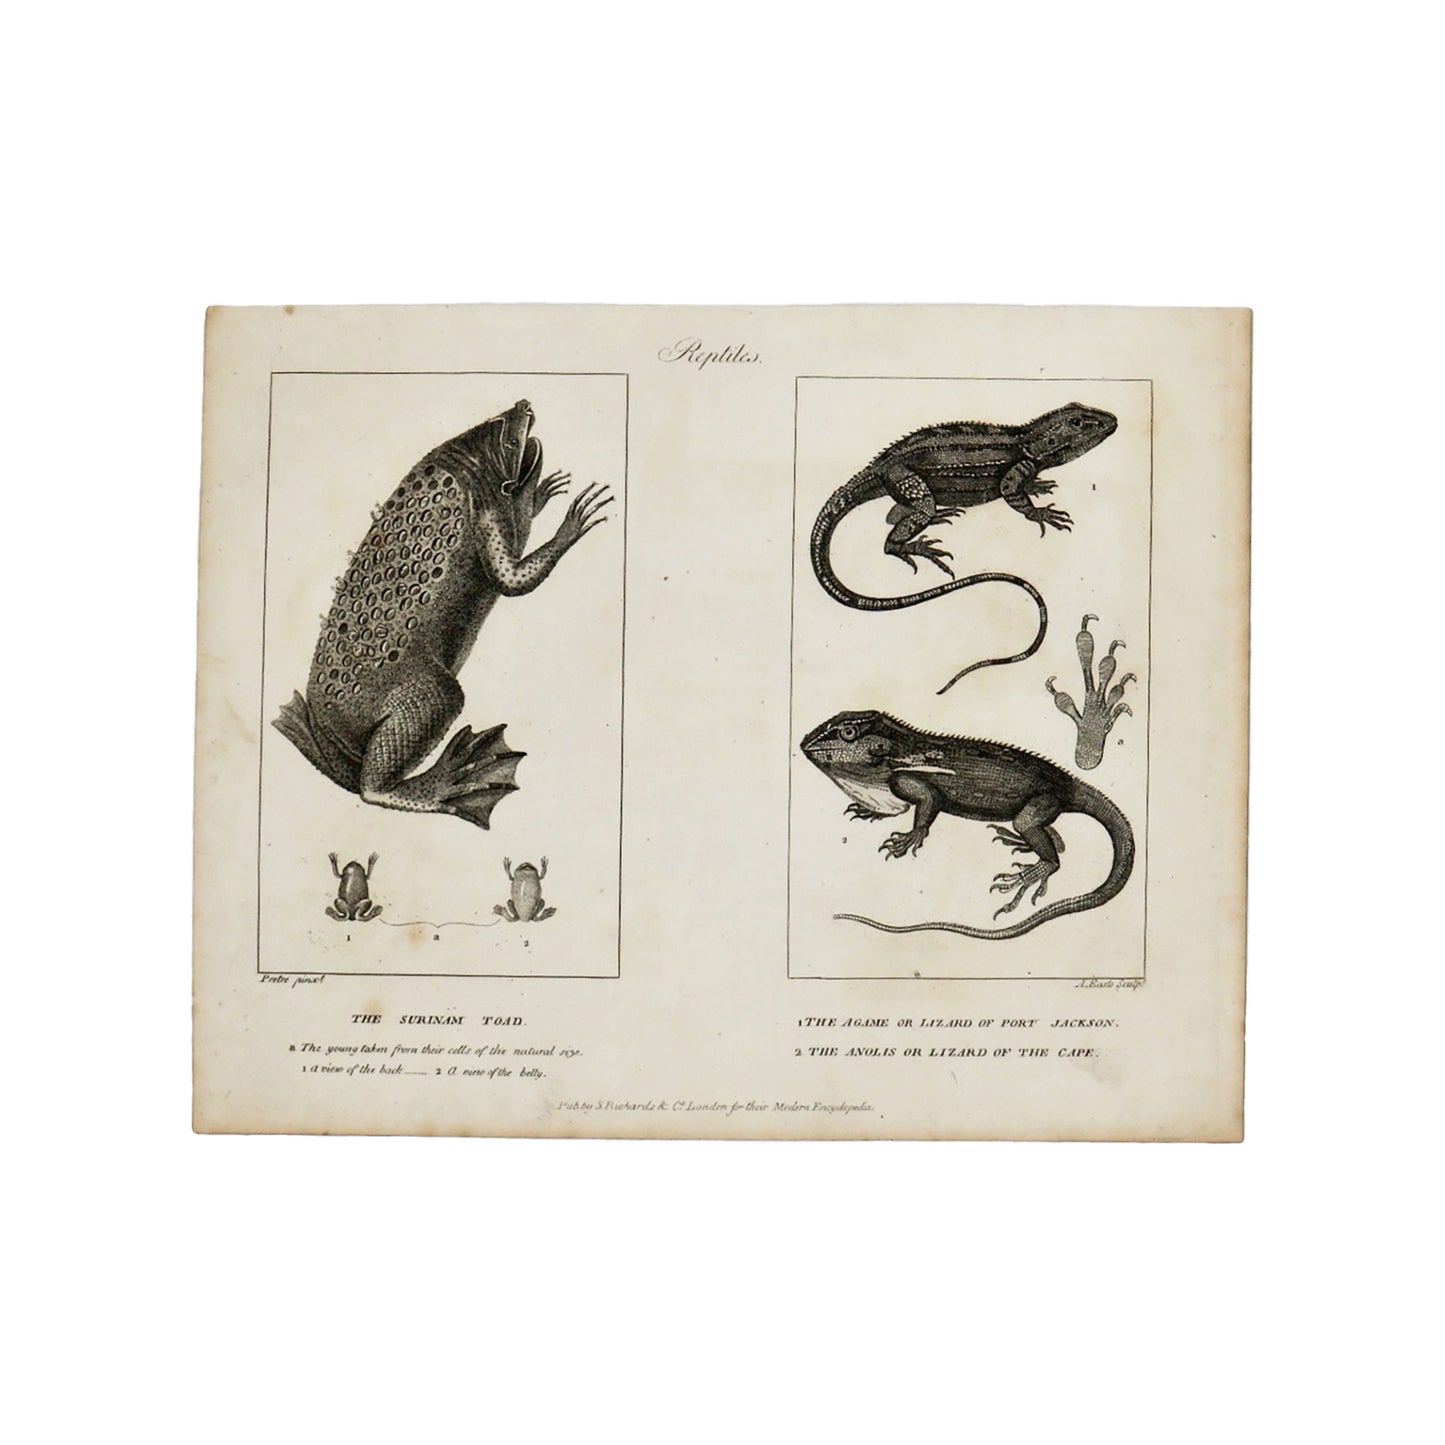 Reptiles (The Surinam Toad, The Agame, the Anolis)  Antique 1820 Engraving from "The Modern Encyclopedia: The Latest Discoveries in each Department of Knowledge."  1820s etching depicting 3 reptiles: The Surinam Toad, The Agame or Lizard of Port Jackson, and the Anolis or Lizard of the Cape.  Measures 10.5 x 8.25 inches.